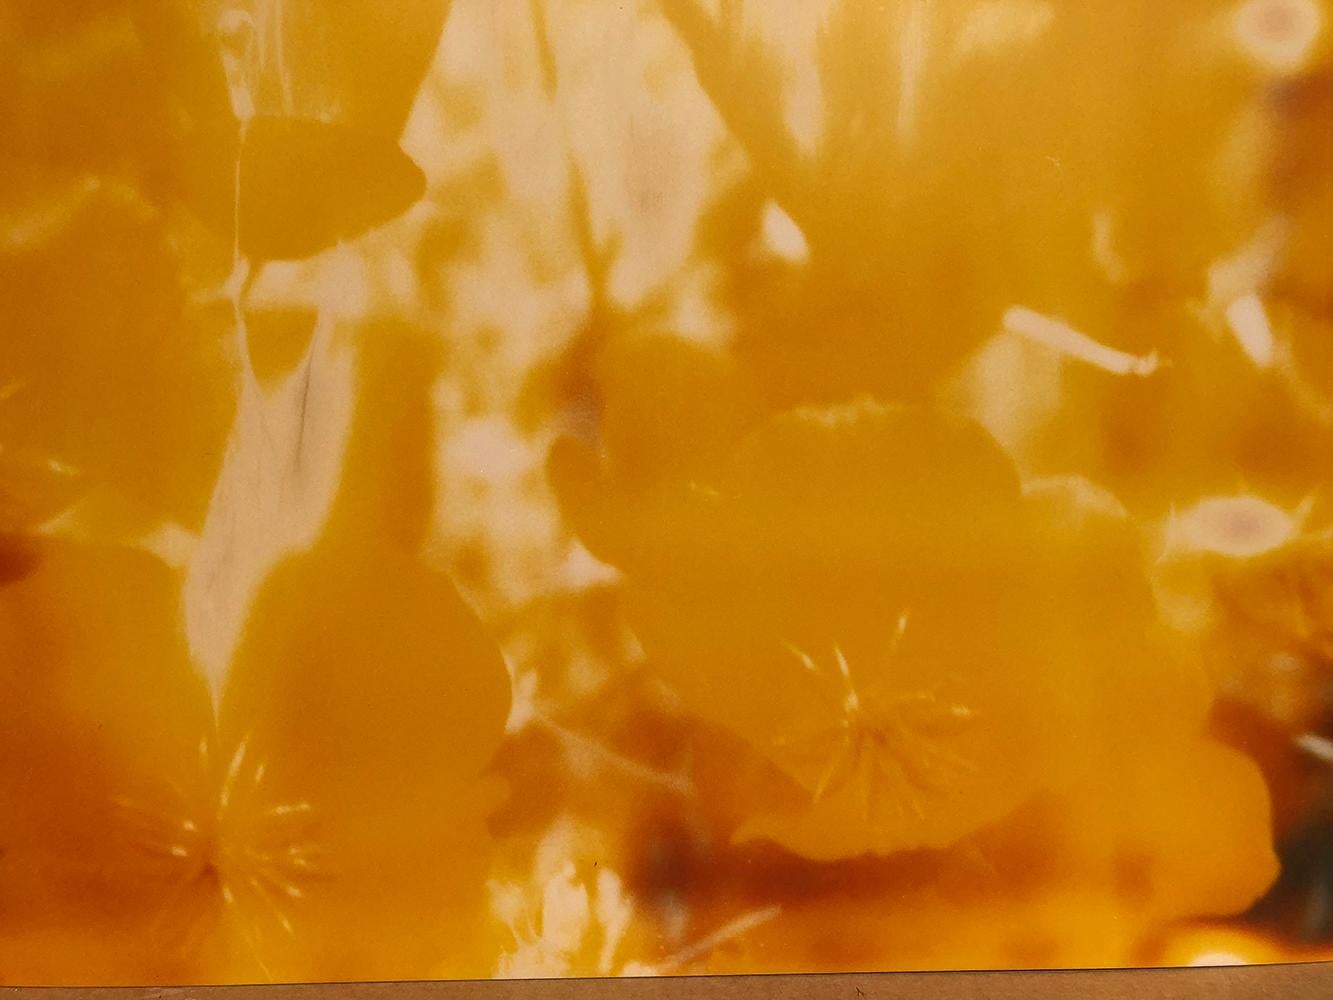 Yellow Flower  - The Last Picture Show, analog, 128x126cm, not mounted - Contemporary Photograph by Stefanie Schneider